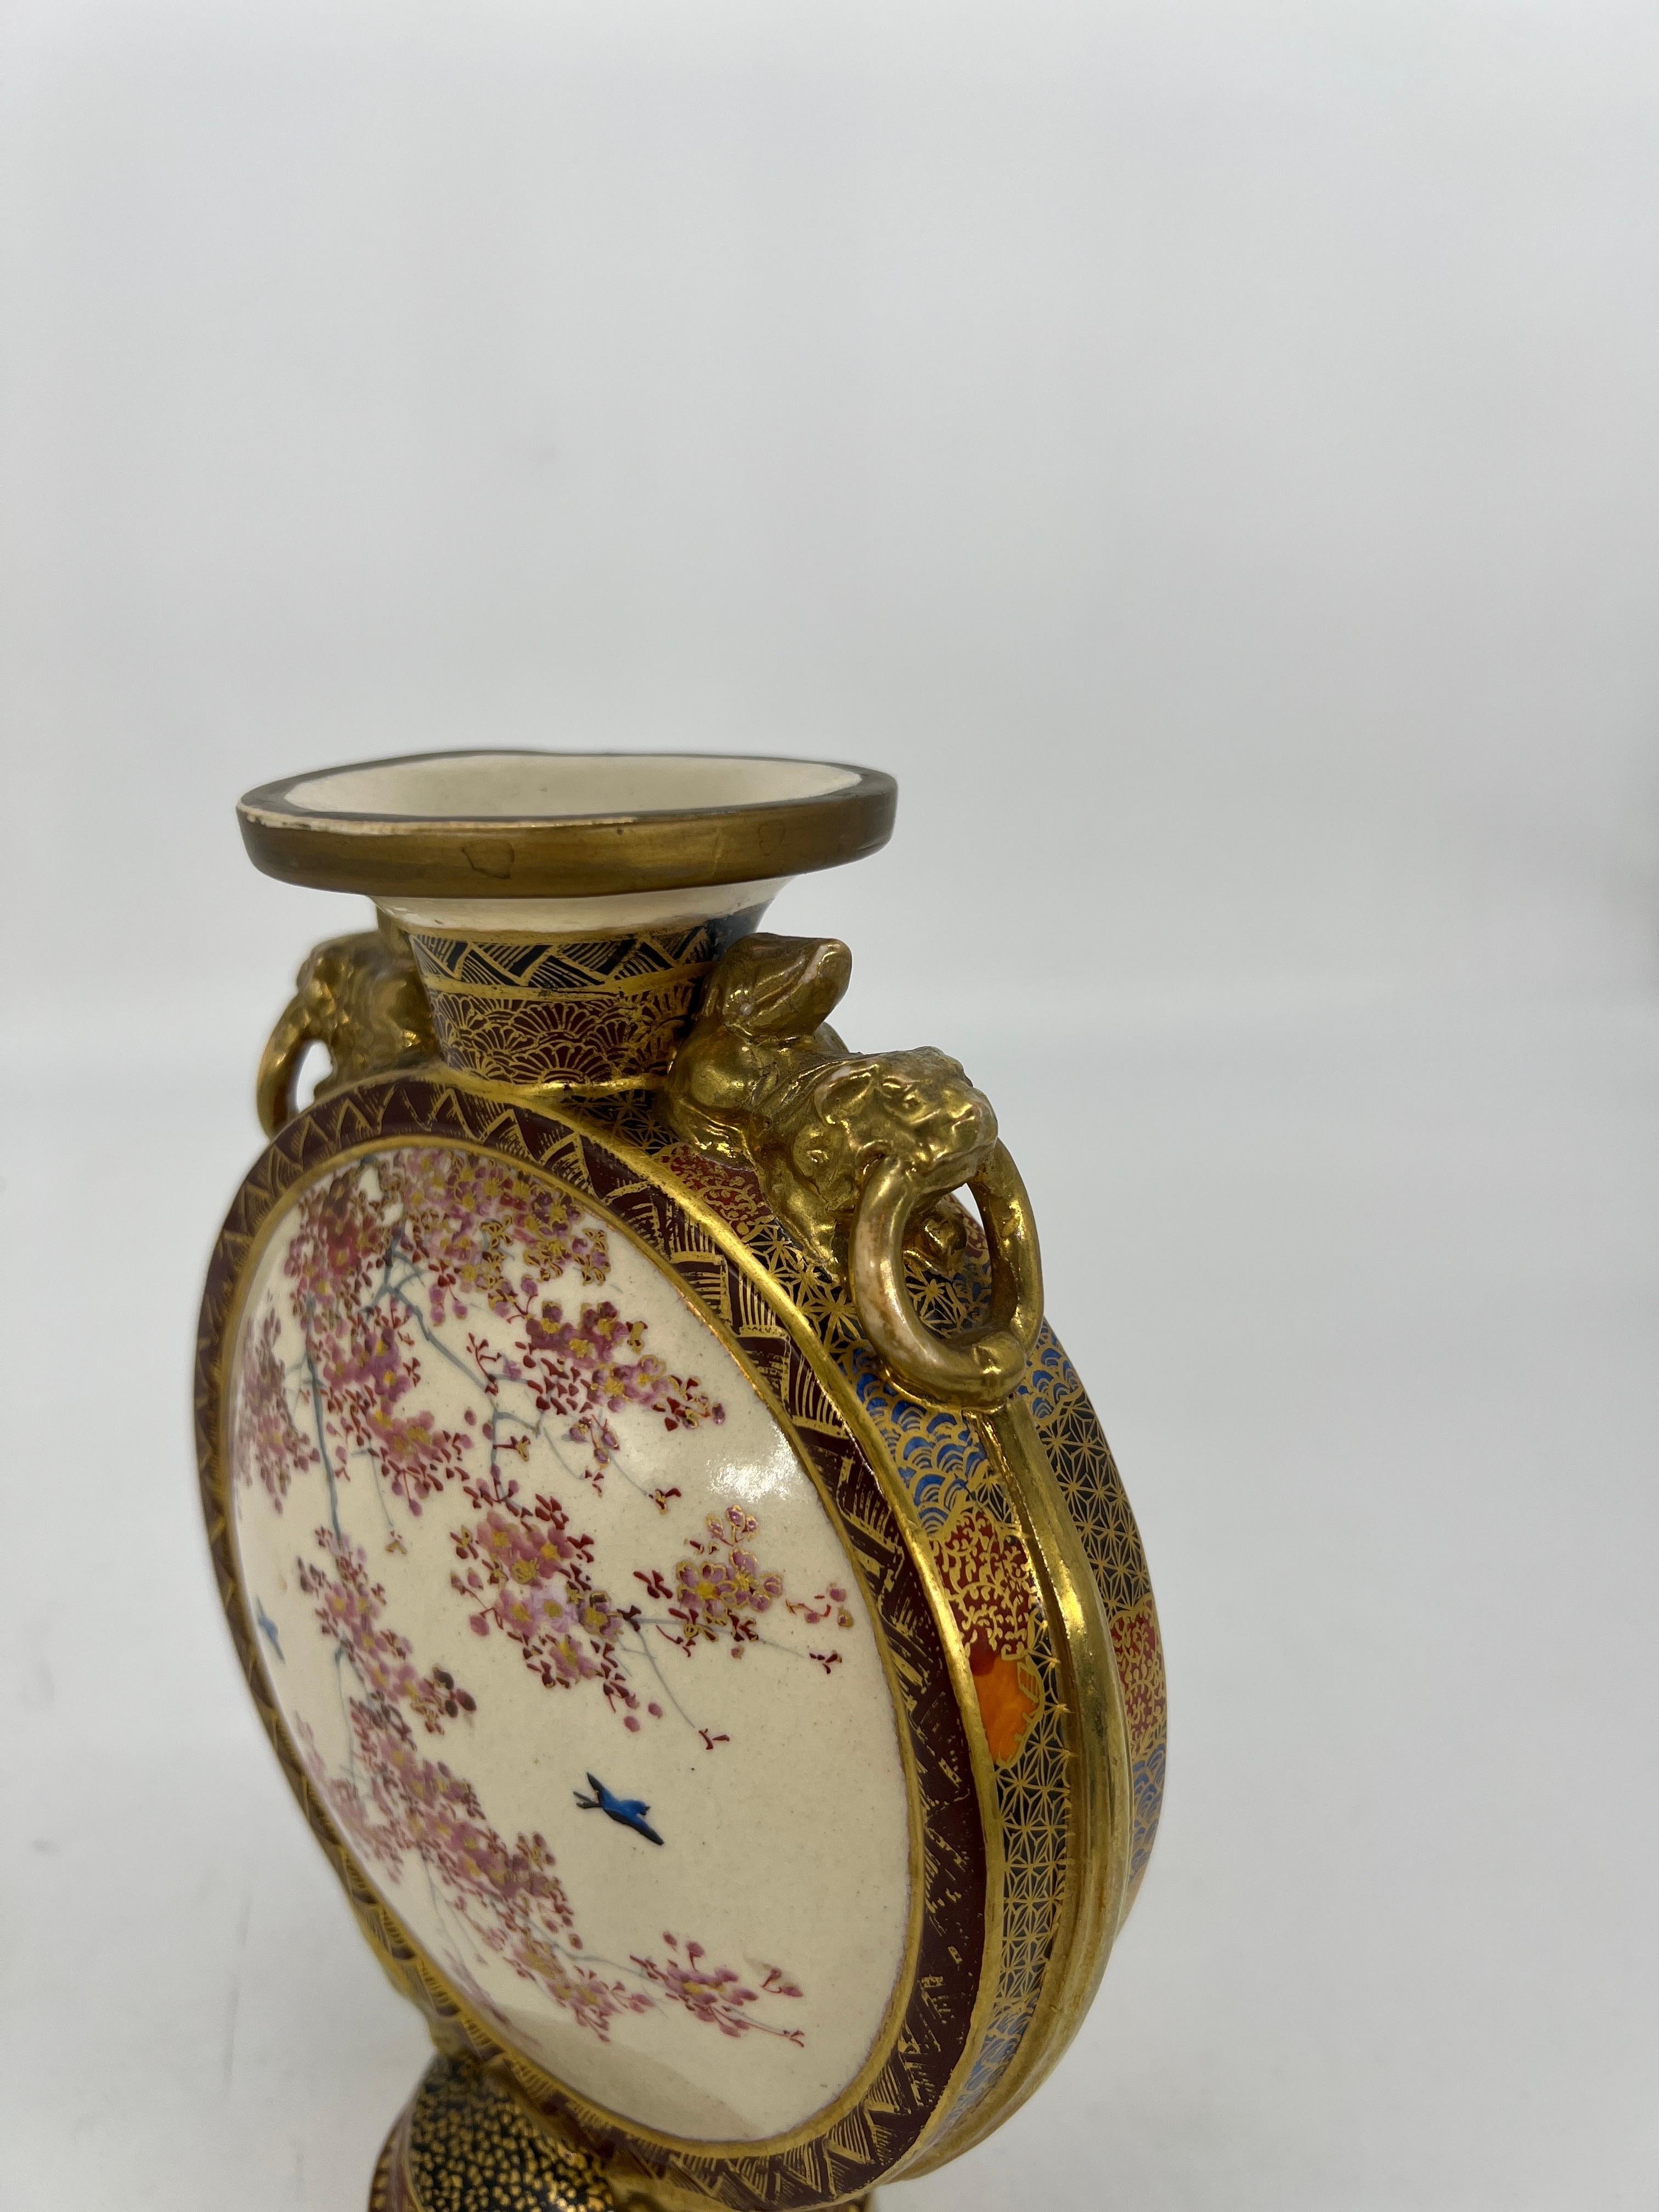 Antique Japanese Satsuma Porcelain Moon Flask Vase Decorated With Peacocks For Sale 3